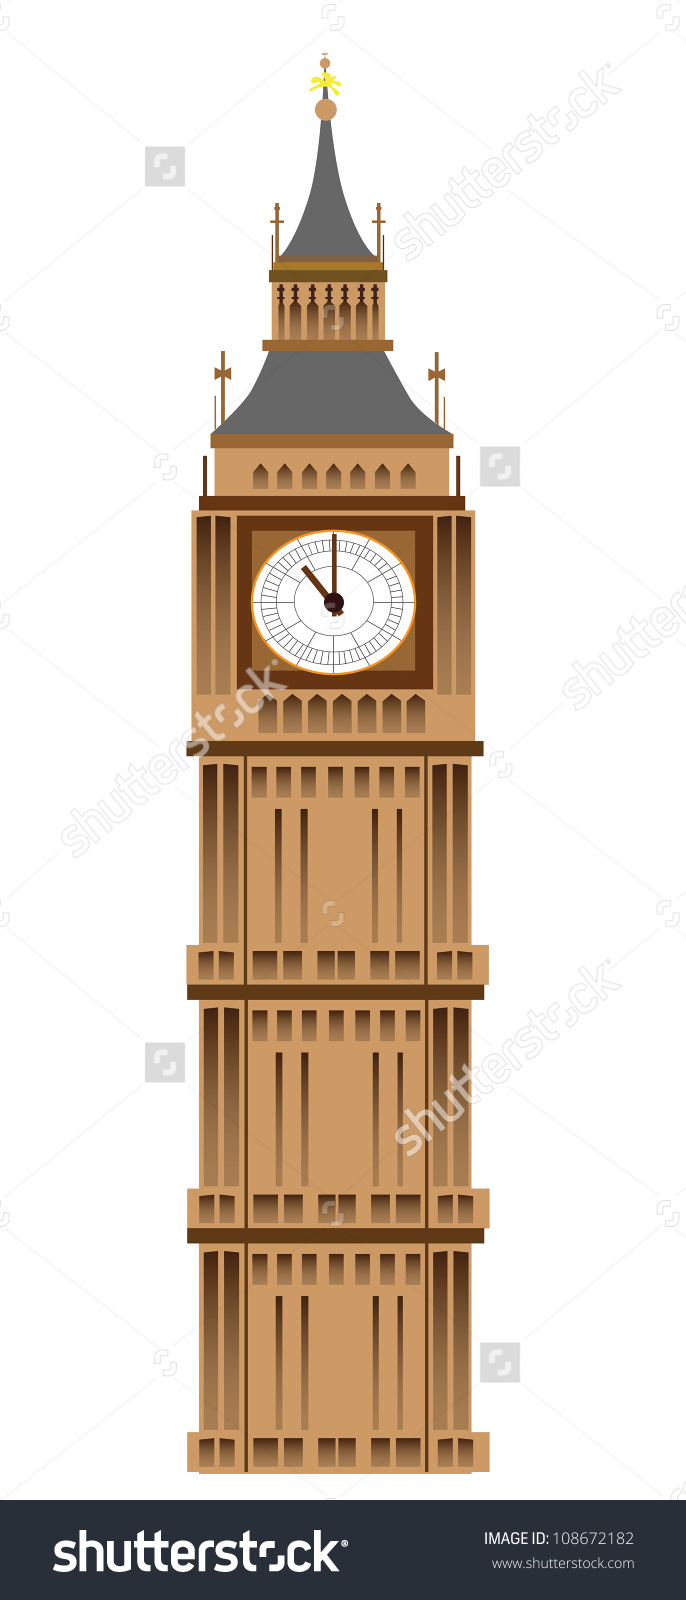 Big Ben Clipart - ClipArt Best. Save to a lightbox